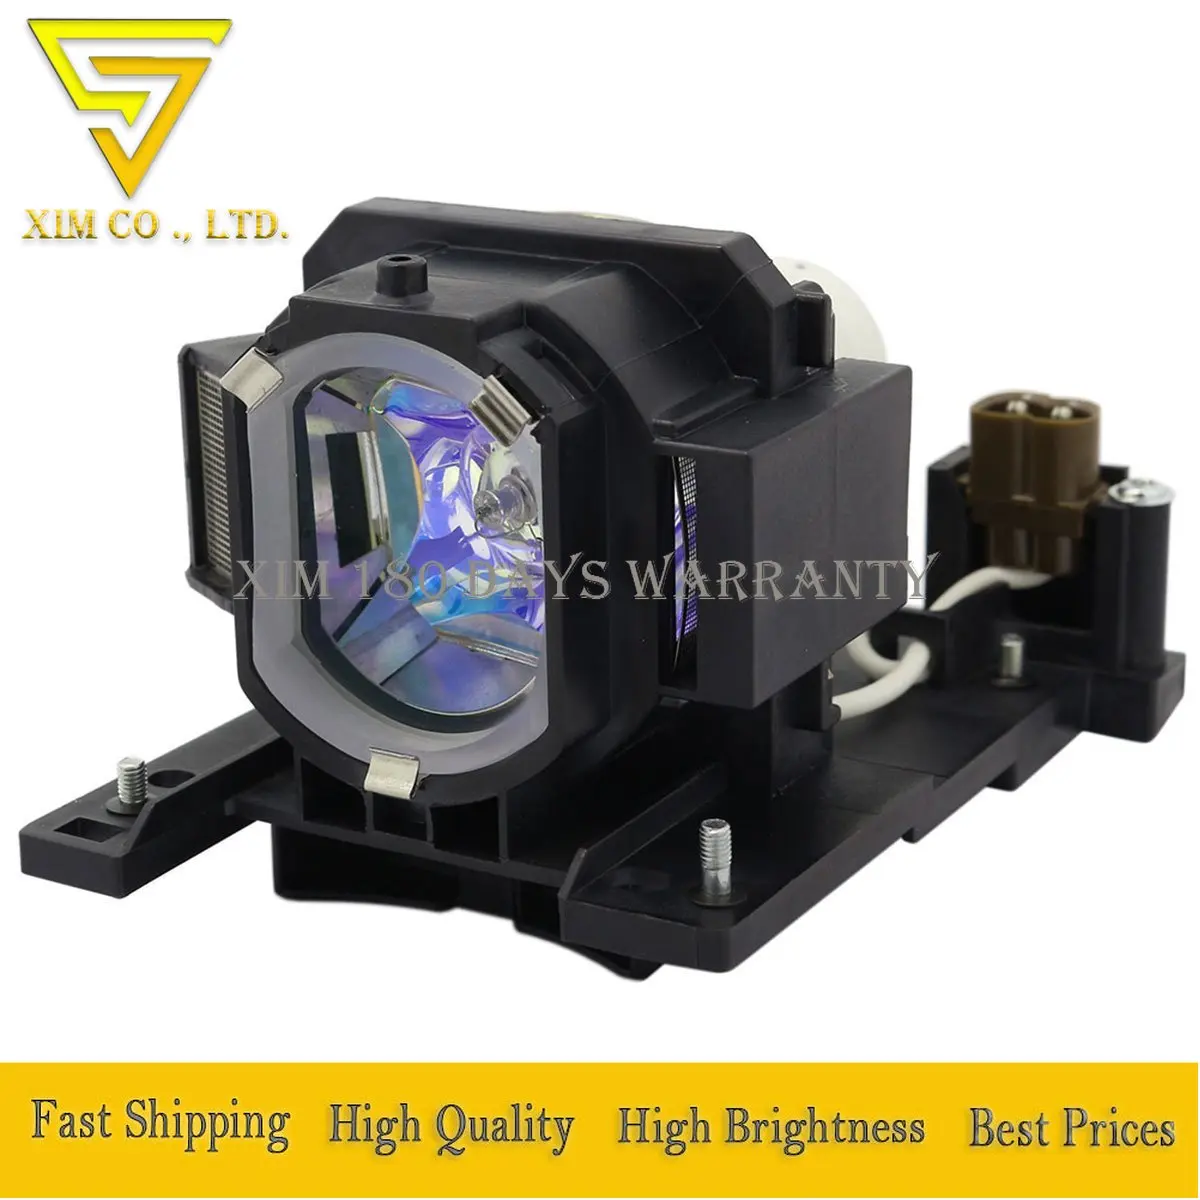 high quality DT01022 DT01026 Replacement Lamp with Housing for Hitachi CP-RX80W CP-RX78 ED-X24 CP-RX78W CP-RX80 projectors dt01091 projector lamp for hitachi cp aw100n cp d10 cp dw10 ed aw100n ed aw110n hcp q3 hcp q3w cp dw1 high quality with housing